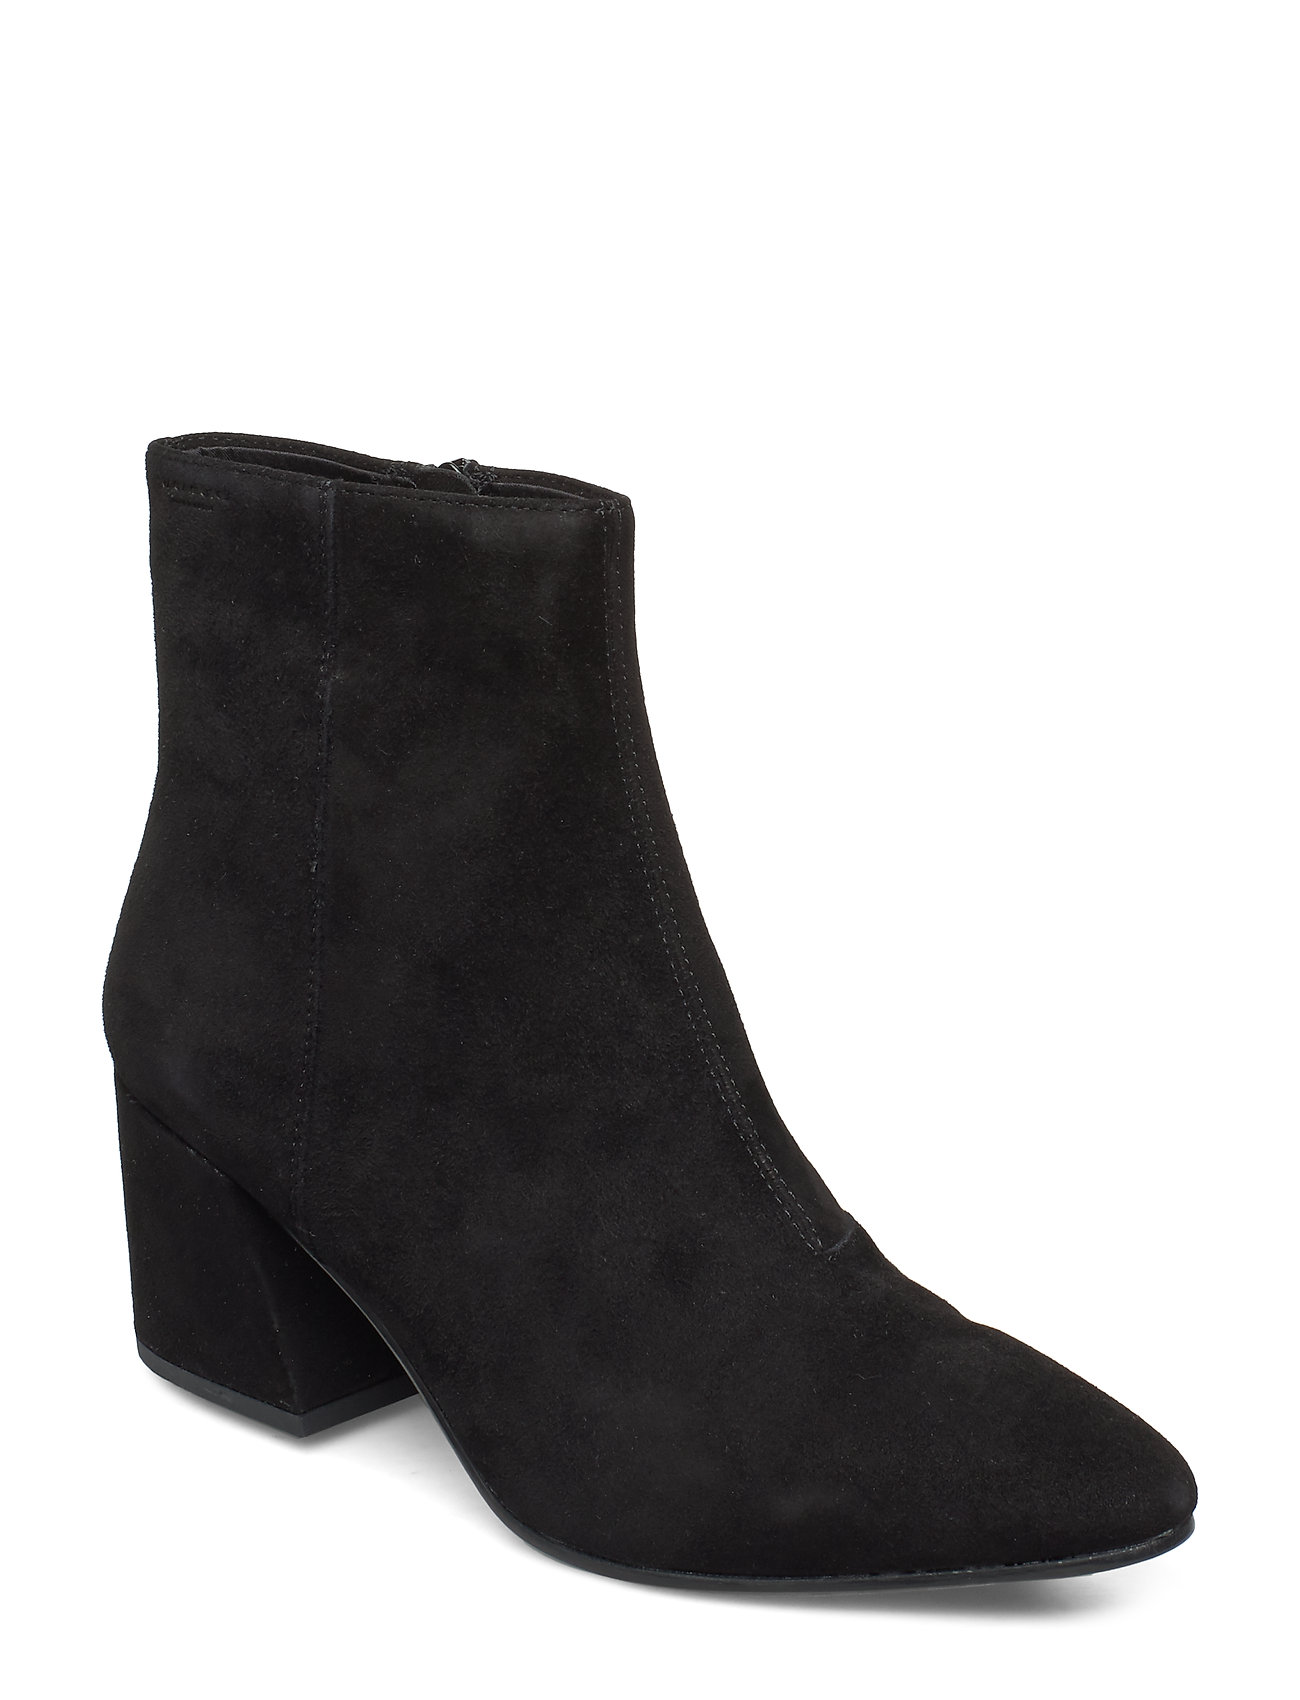 Olivia Shoes Boots Ankle Boots Ankle Boot - Heel Musta VAGABOND